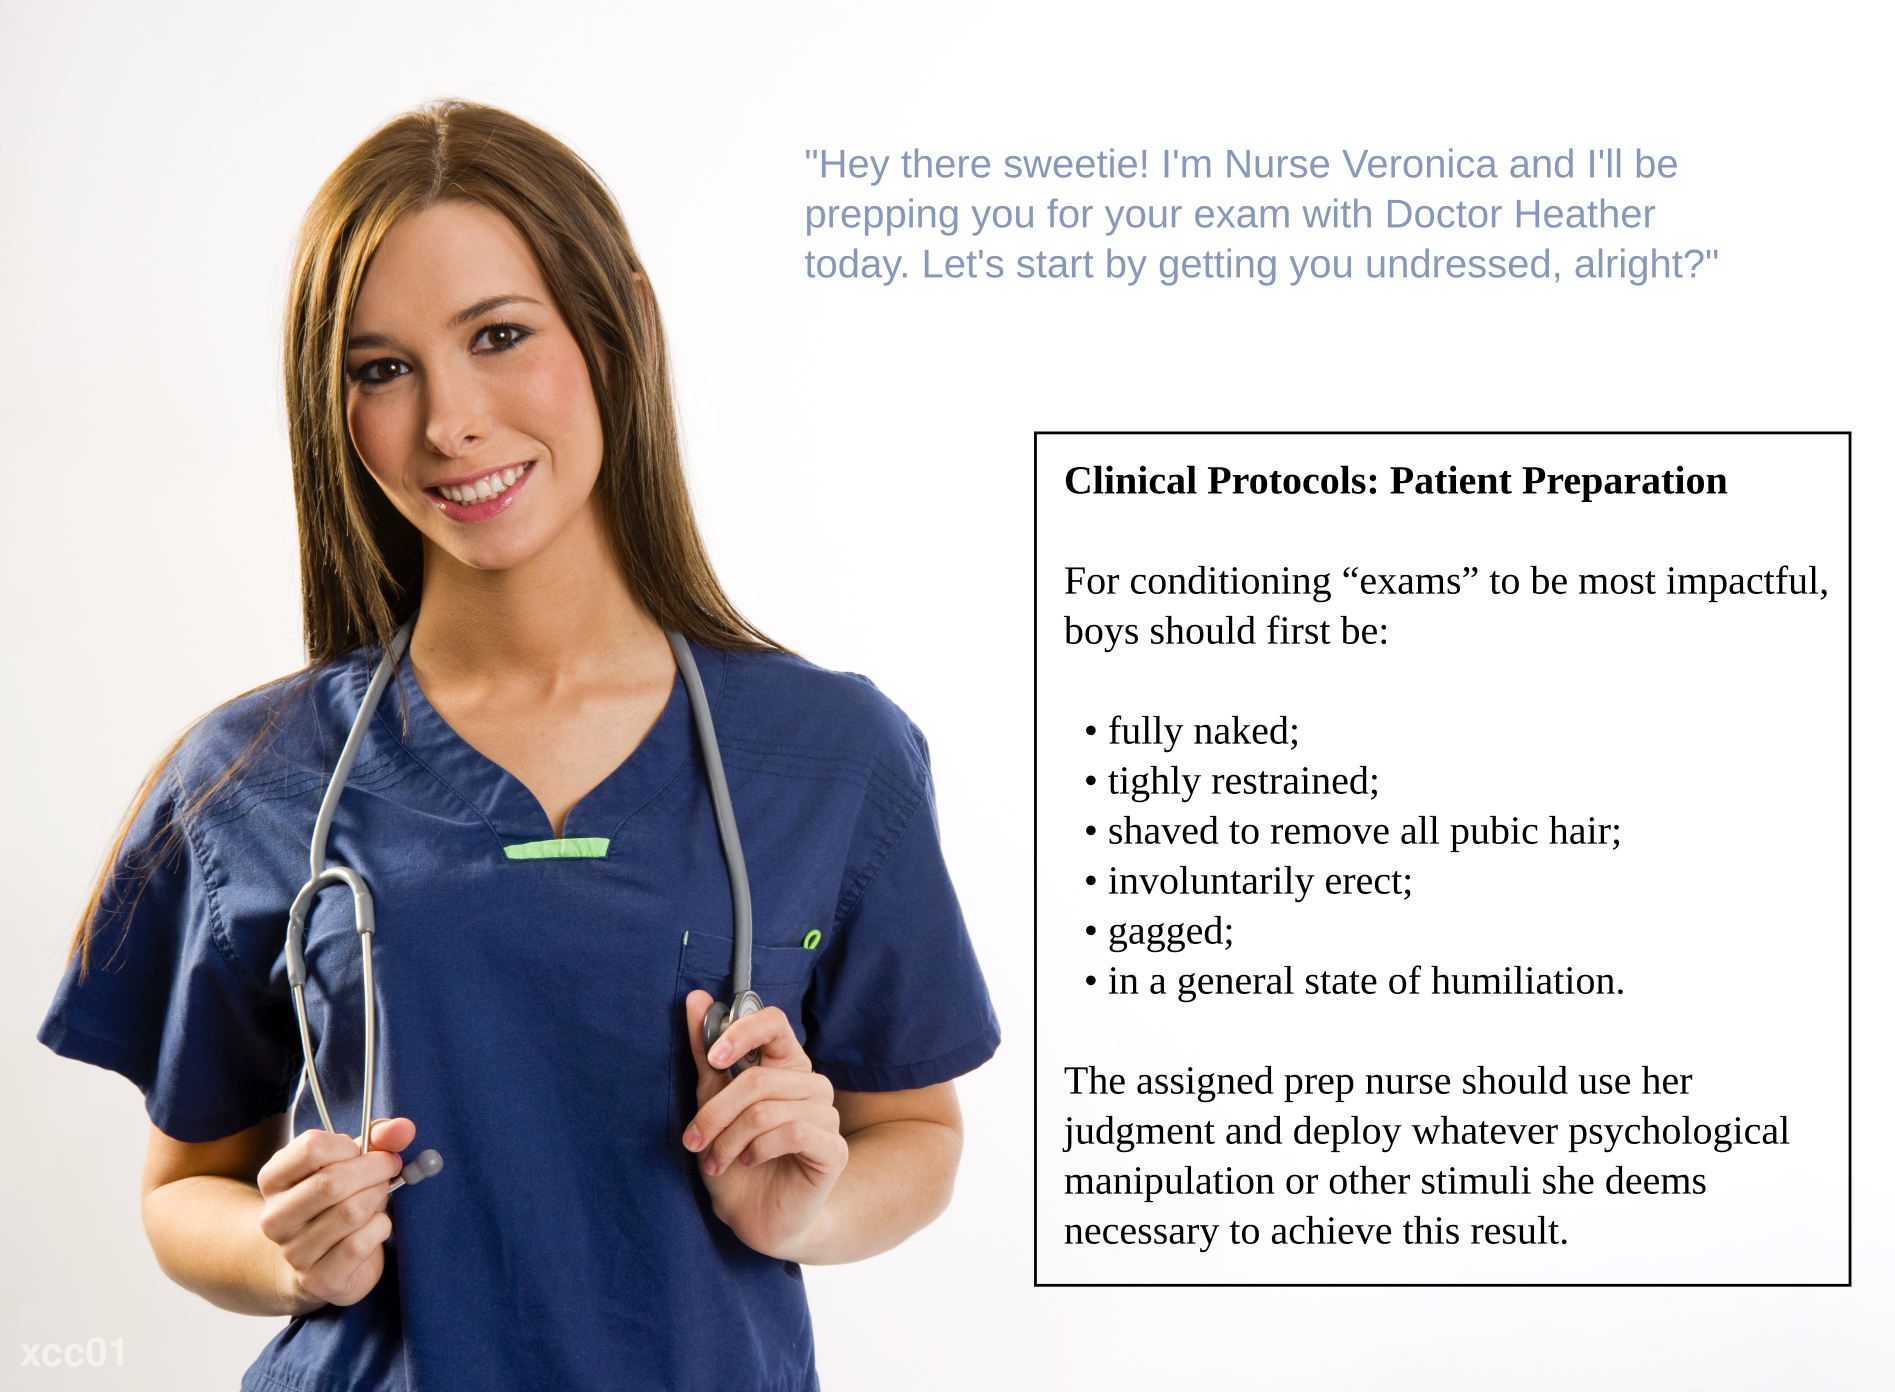 Clinical Protocols: Patient Preparation - For conditioning 'exams' to be most impactful, boys should first be: fully naked; tightly restrained; shaved to remove all pubic hair; involuntarily erect; gagged; in a general state of humiliation. The assigned prep nurse should use her judgement and deploy whatever psychological manipulation or other stimuli she deems necessary to achieve this result.
